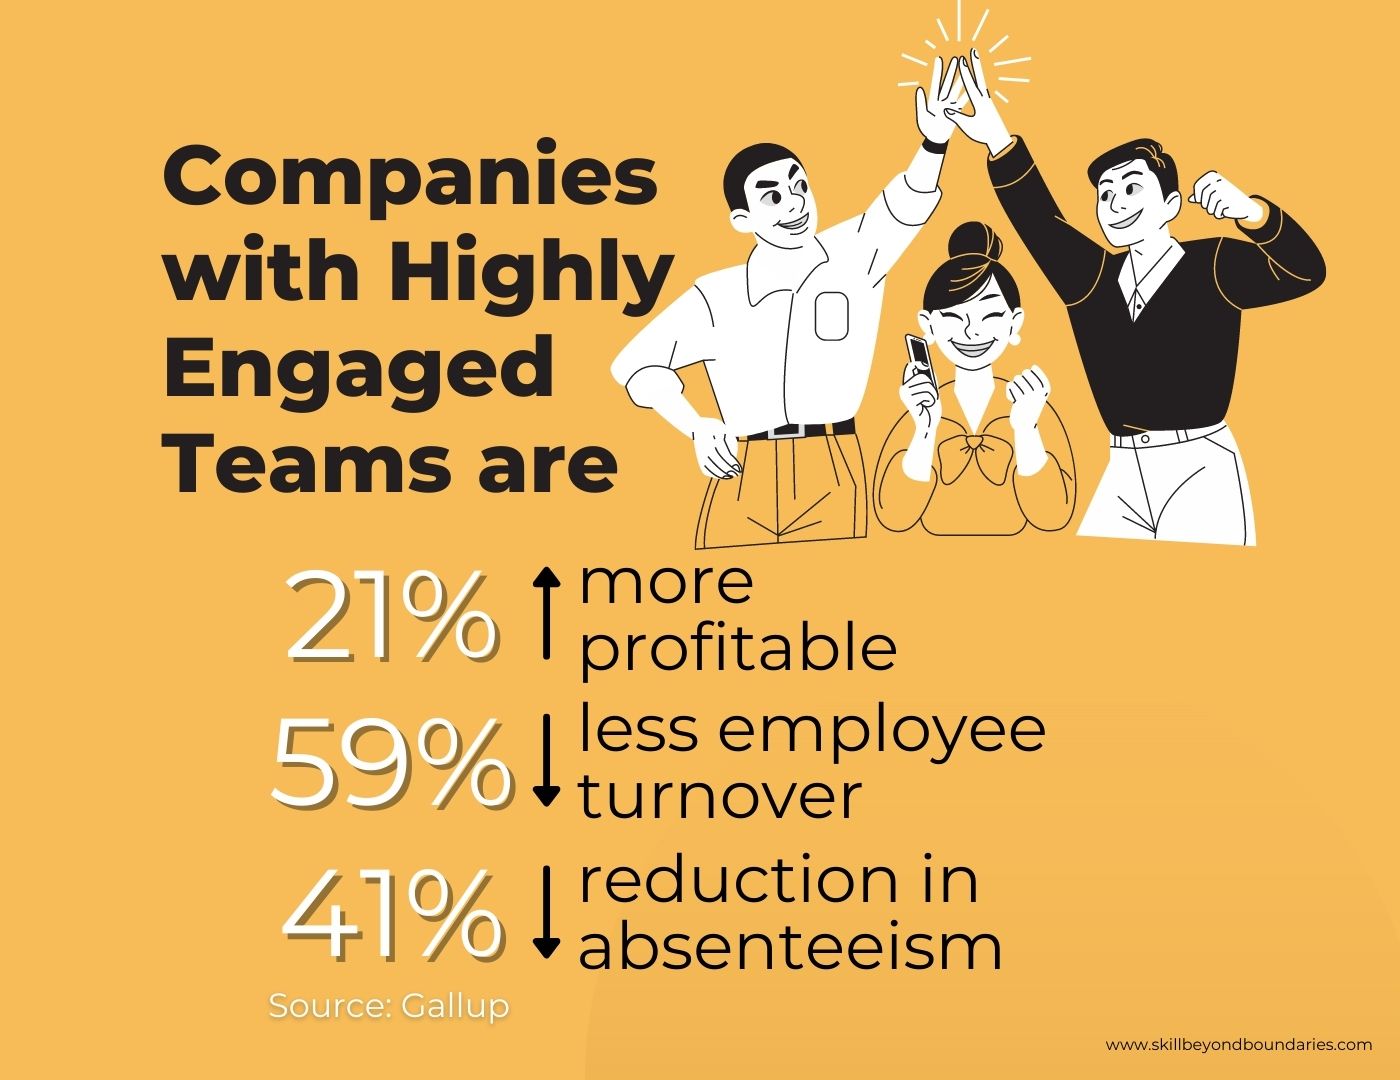 Engaged teams are more profitable for companies